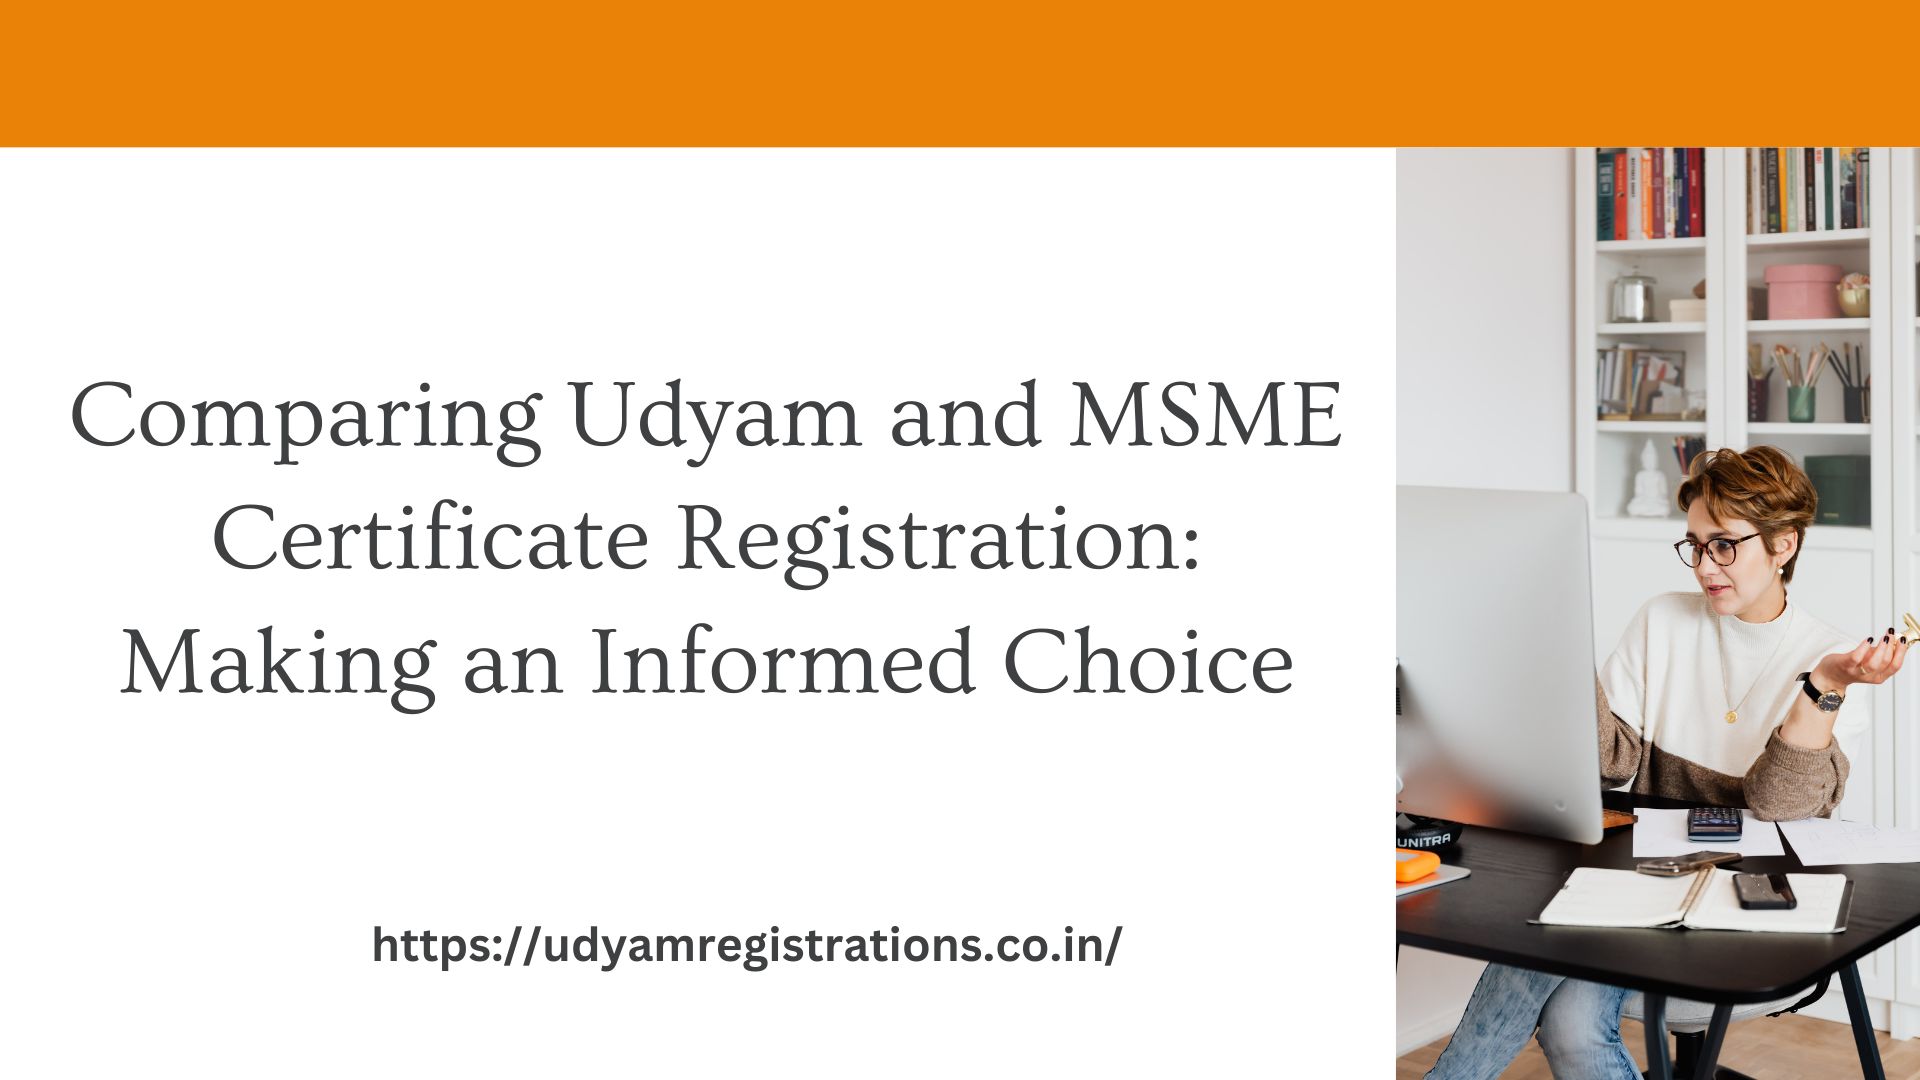 Comparing Udyam and MSME Certificate Registration: Making an Informed Choice